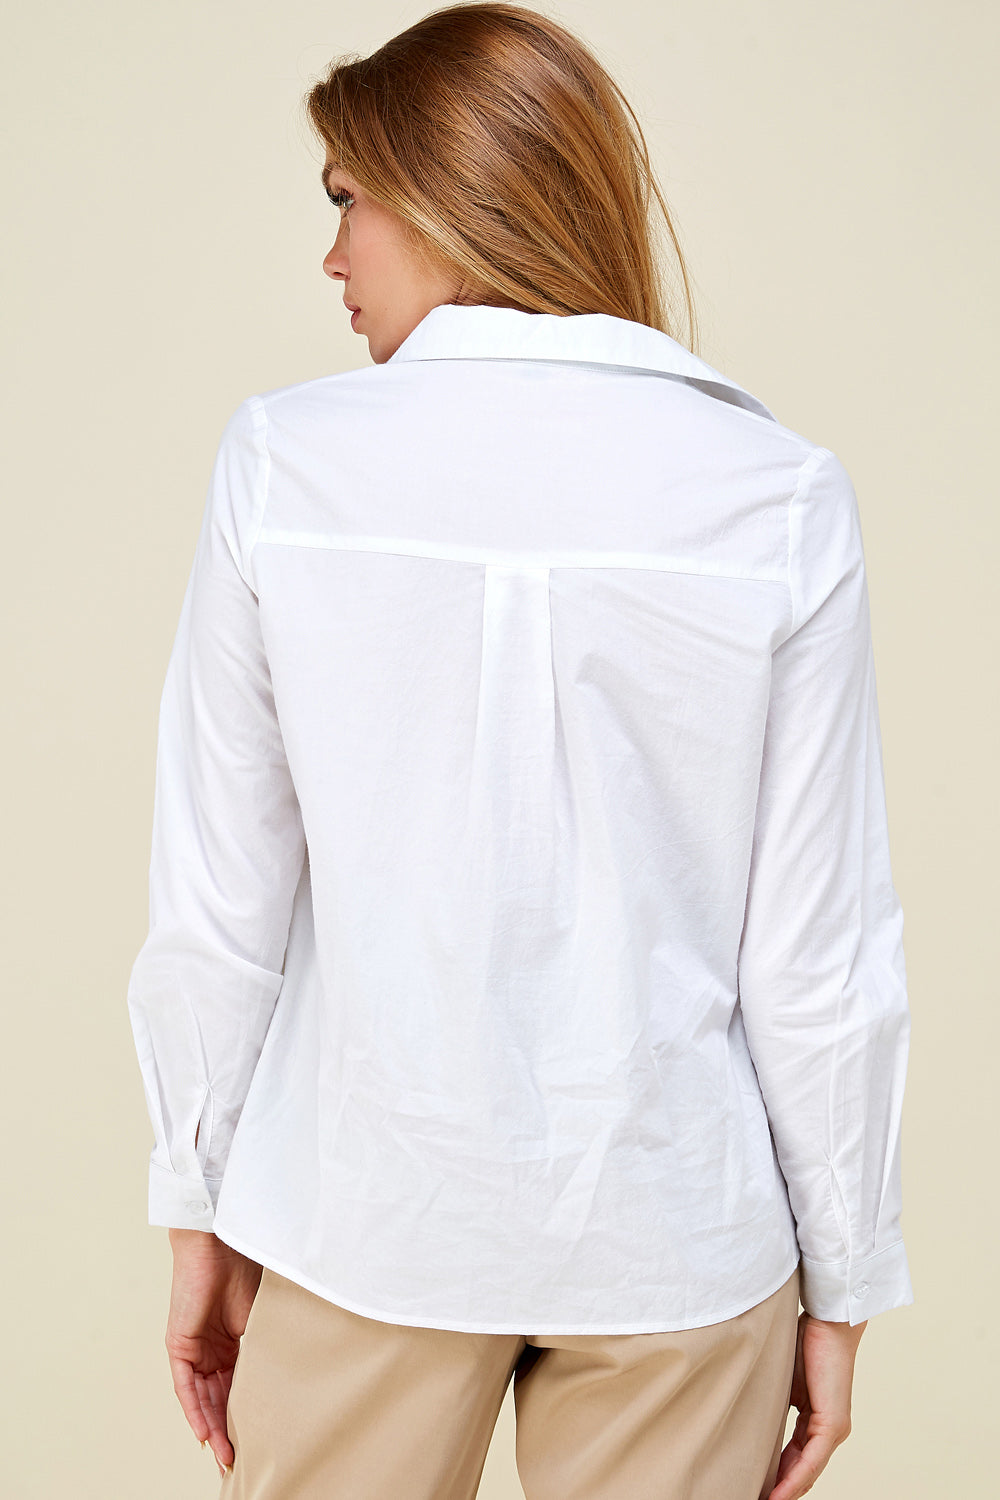 [$5/piece] Front Pleated Long Sleeve Shirt